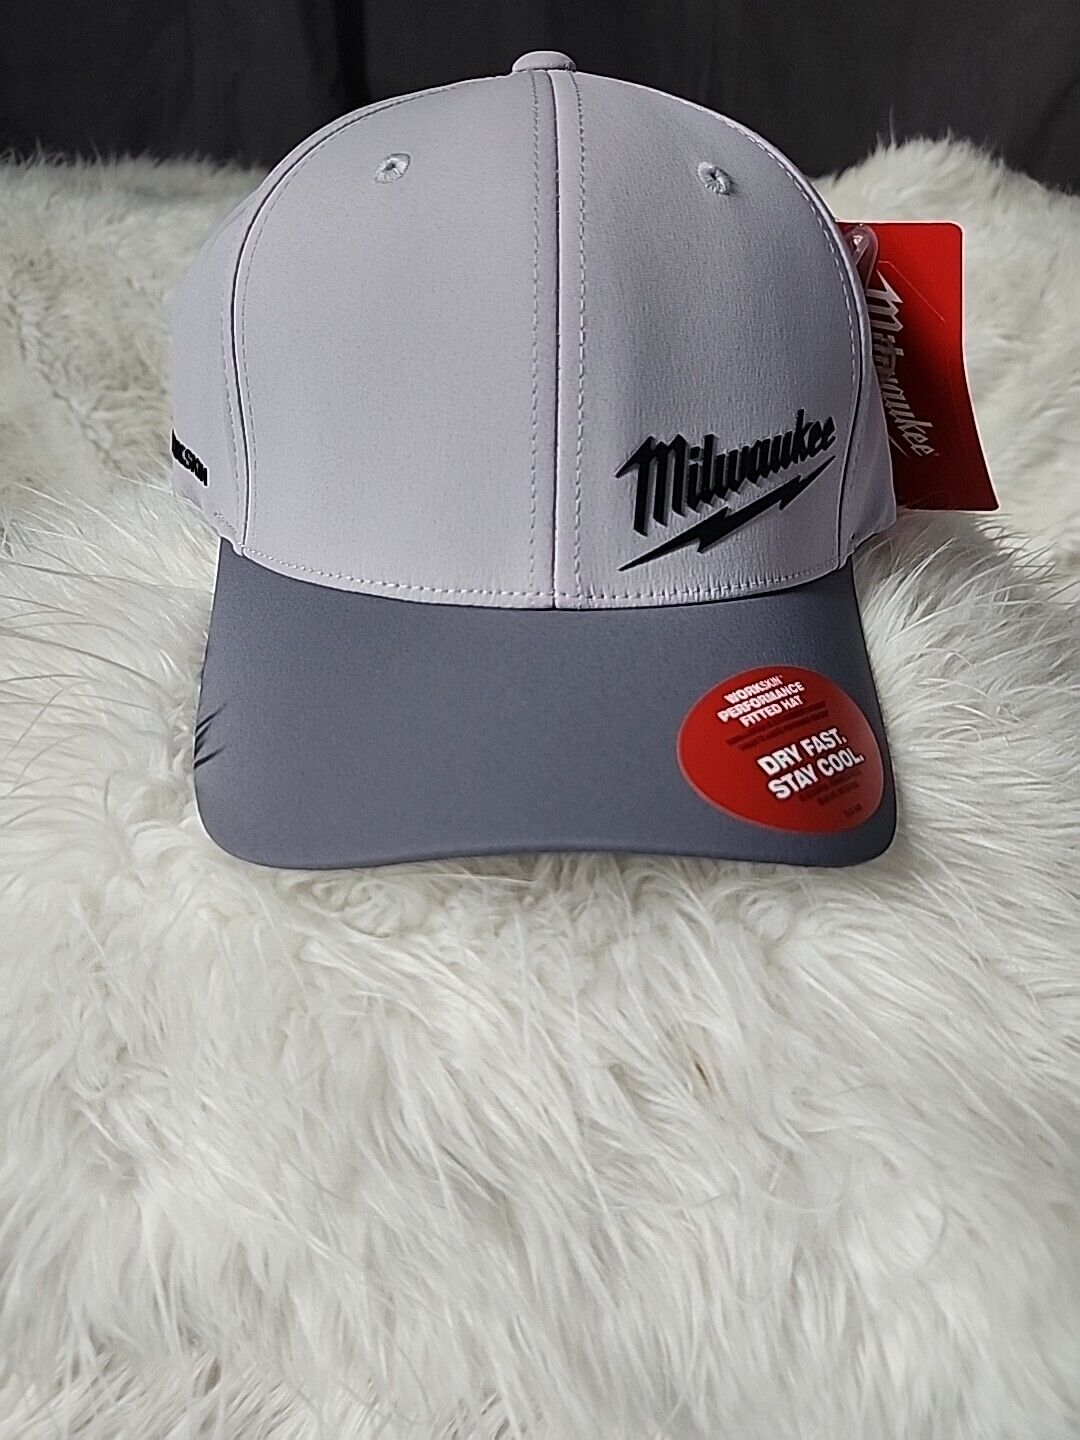 MILWAUKEE 507G-LXL WORKSKIN Performance Fitted Hat - Large/Extra Large - NEW